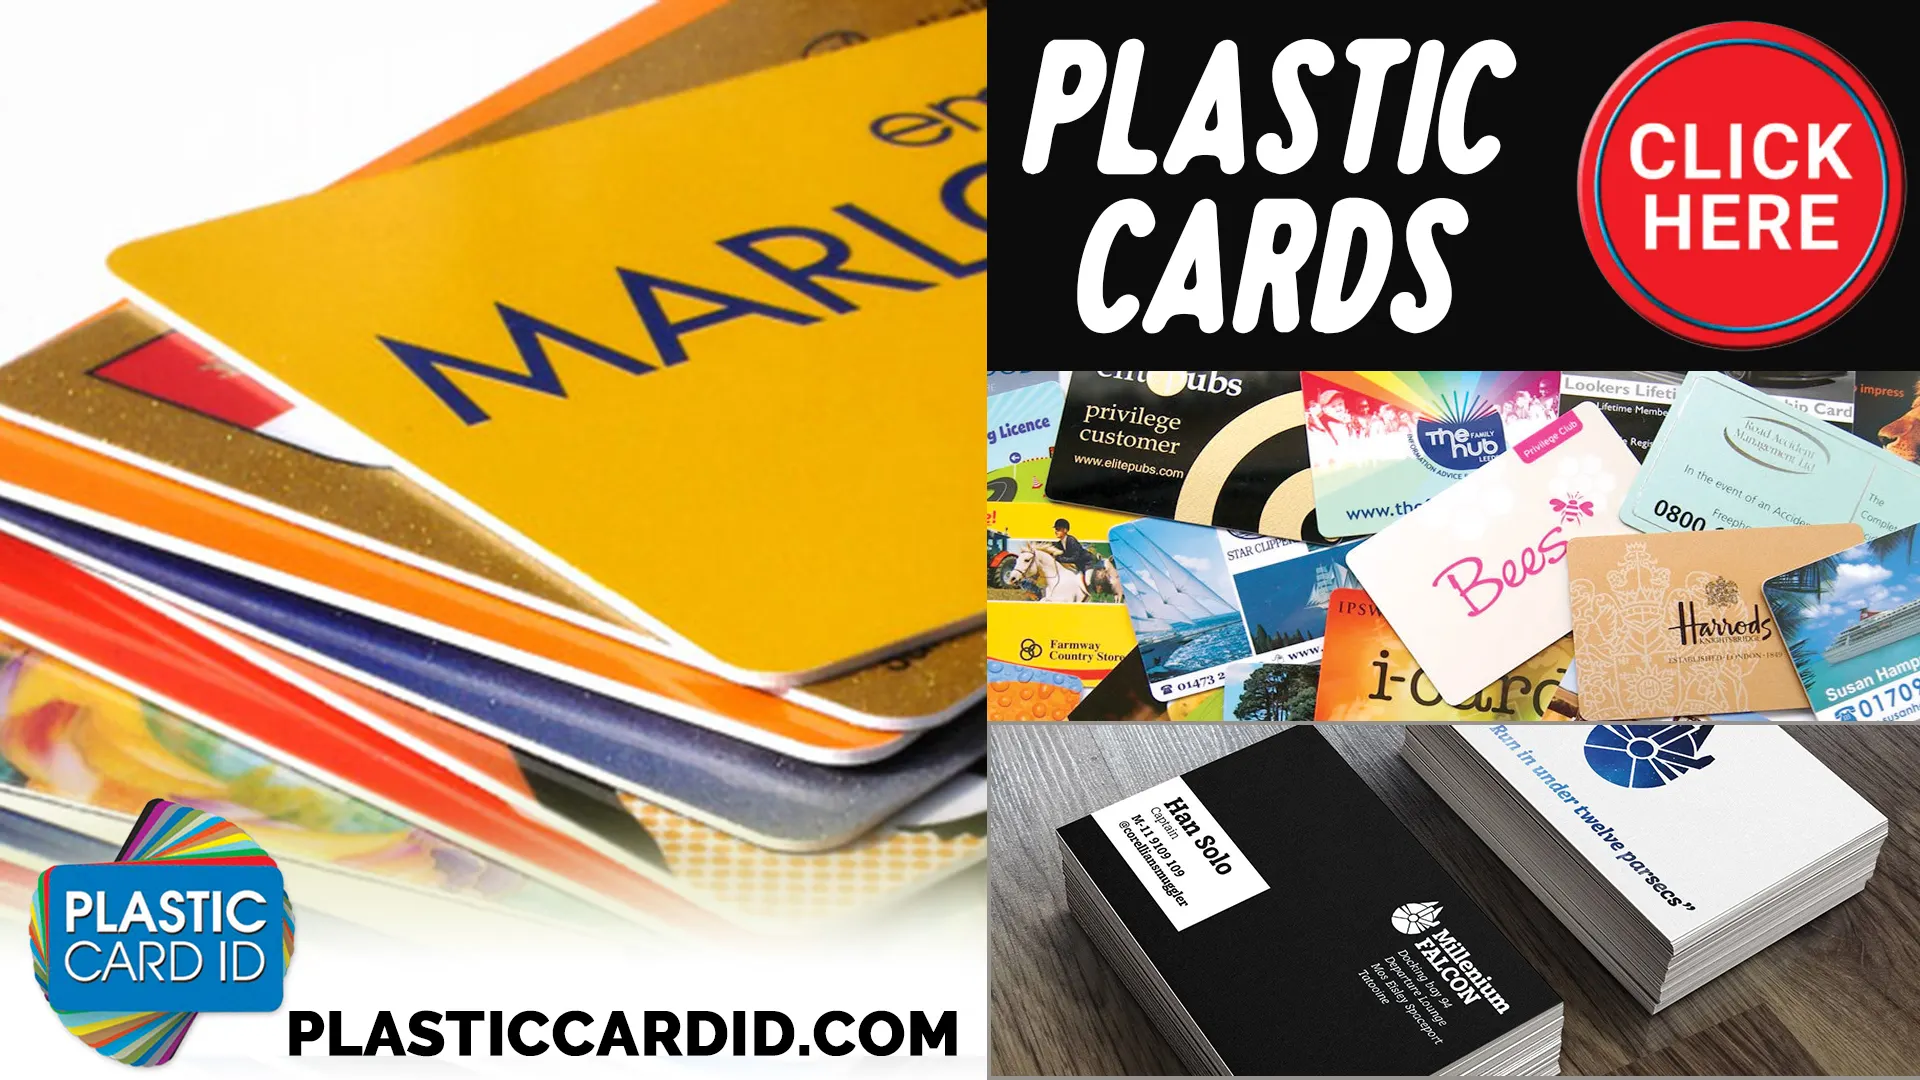 Welcome to the World of Embossed and Debossed Plastic Cards